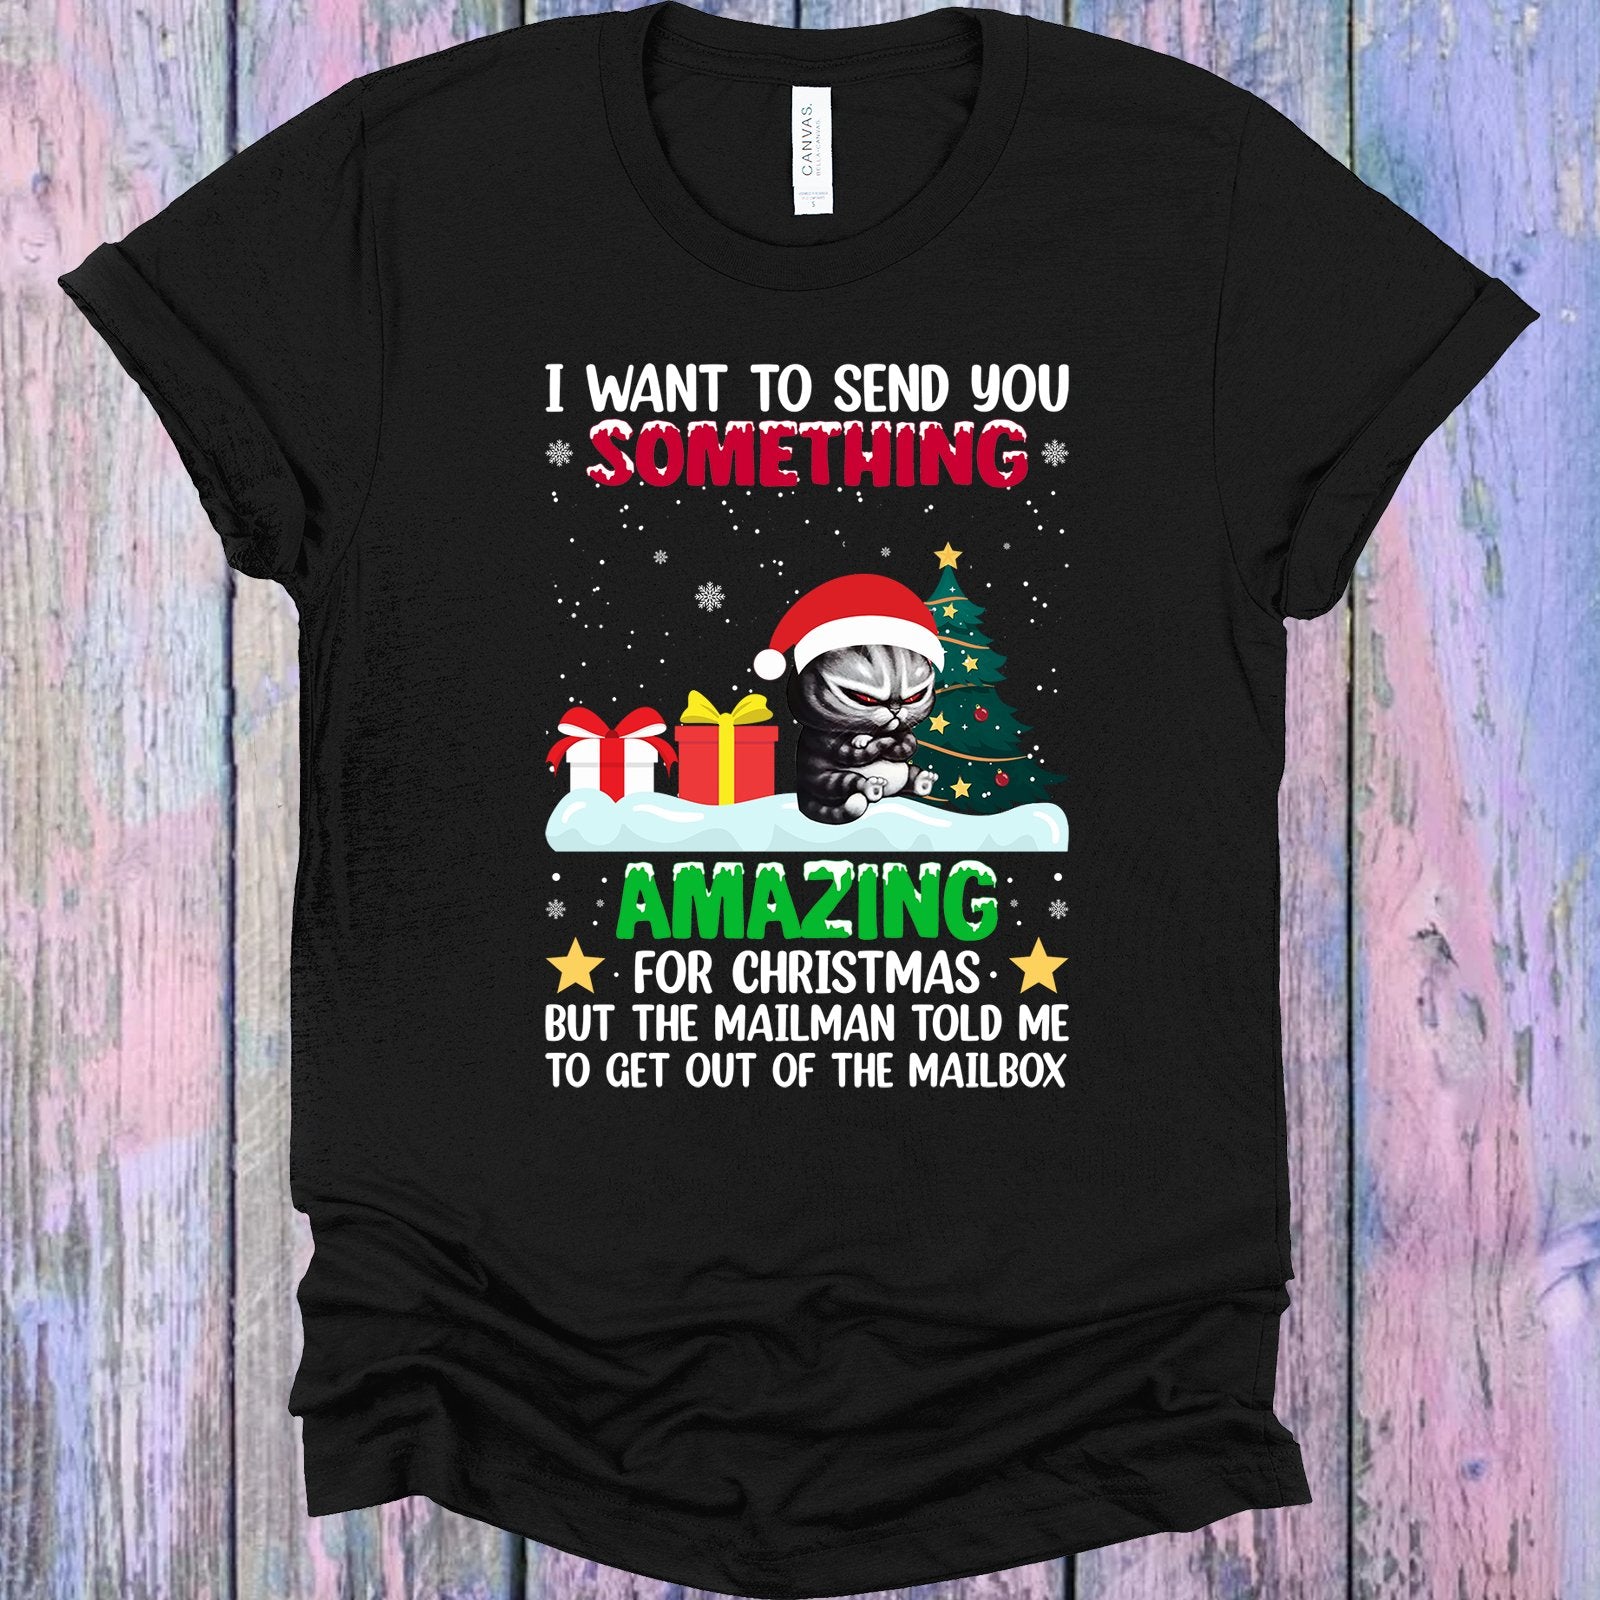 I Want To Send You Something Amazing For Christmas Graphic Tee Graphic Tee